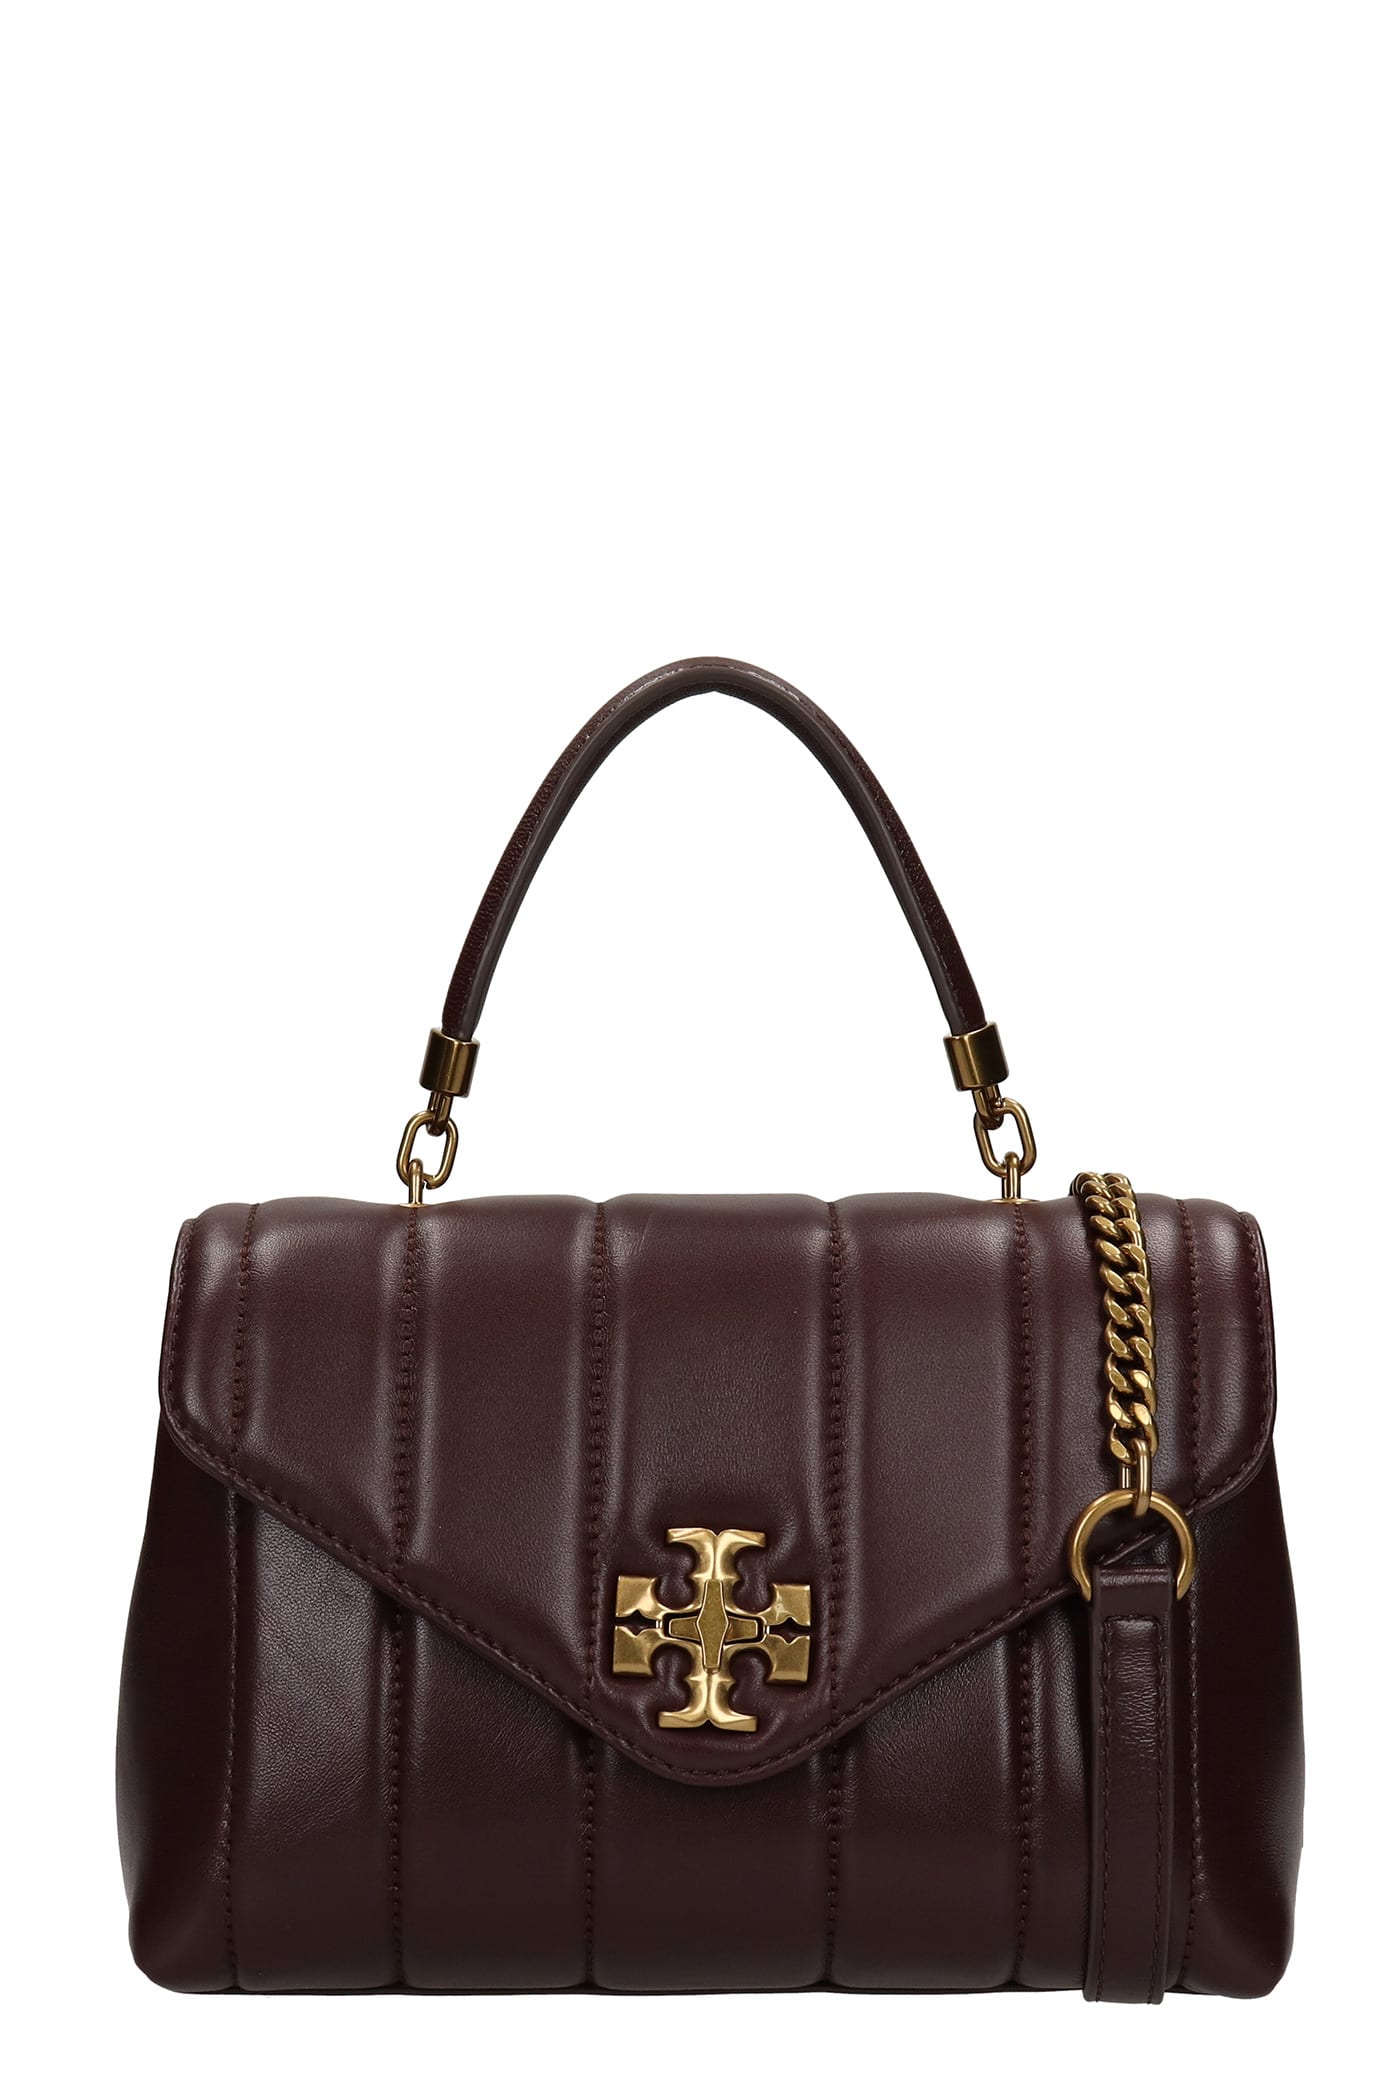 Tory Burch Hand Bag In Bordeaux Leather